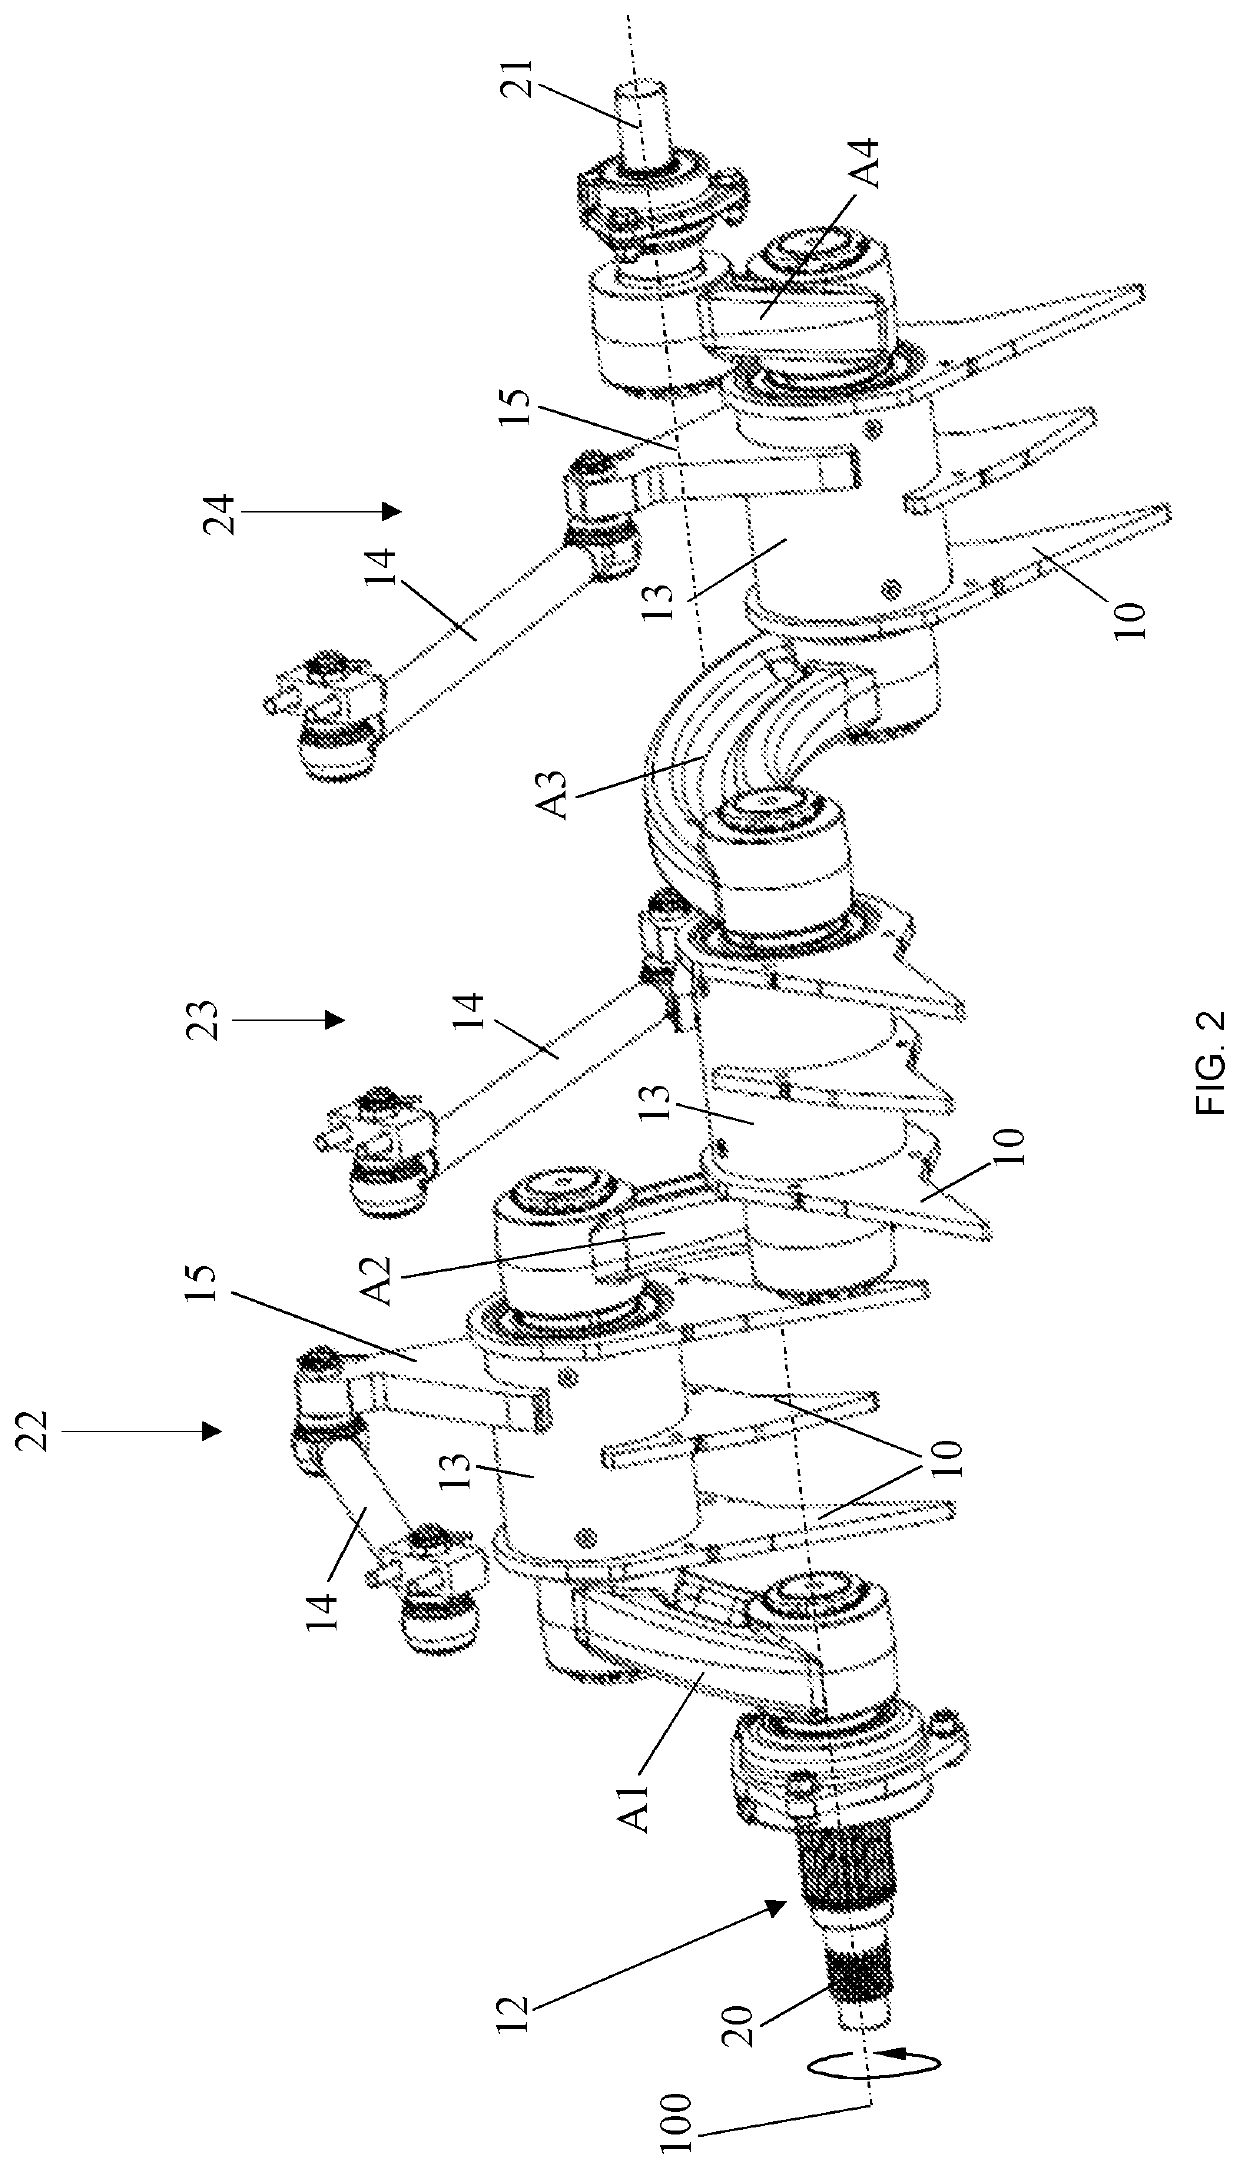 Statically balanced crank-operated packer mechanism for an agricultural baler